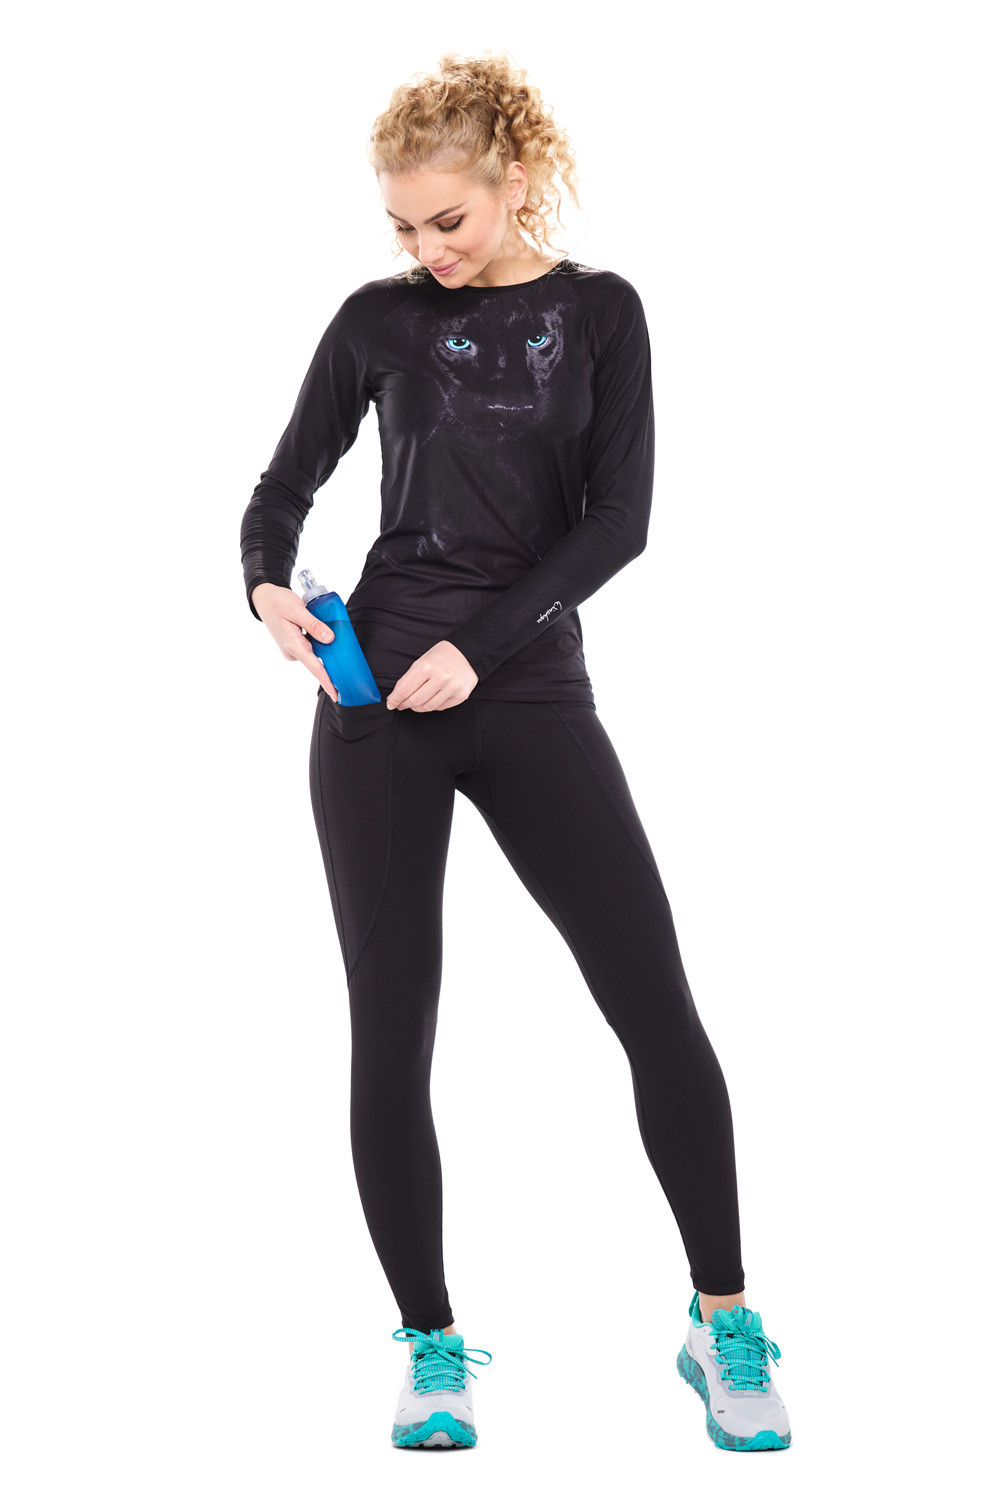 Top Sleeve Style Soft Panther, Ultra Light Functional AET120LS, Soft Winshape and Long